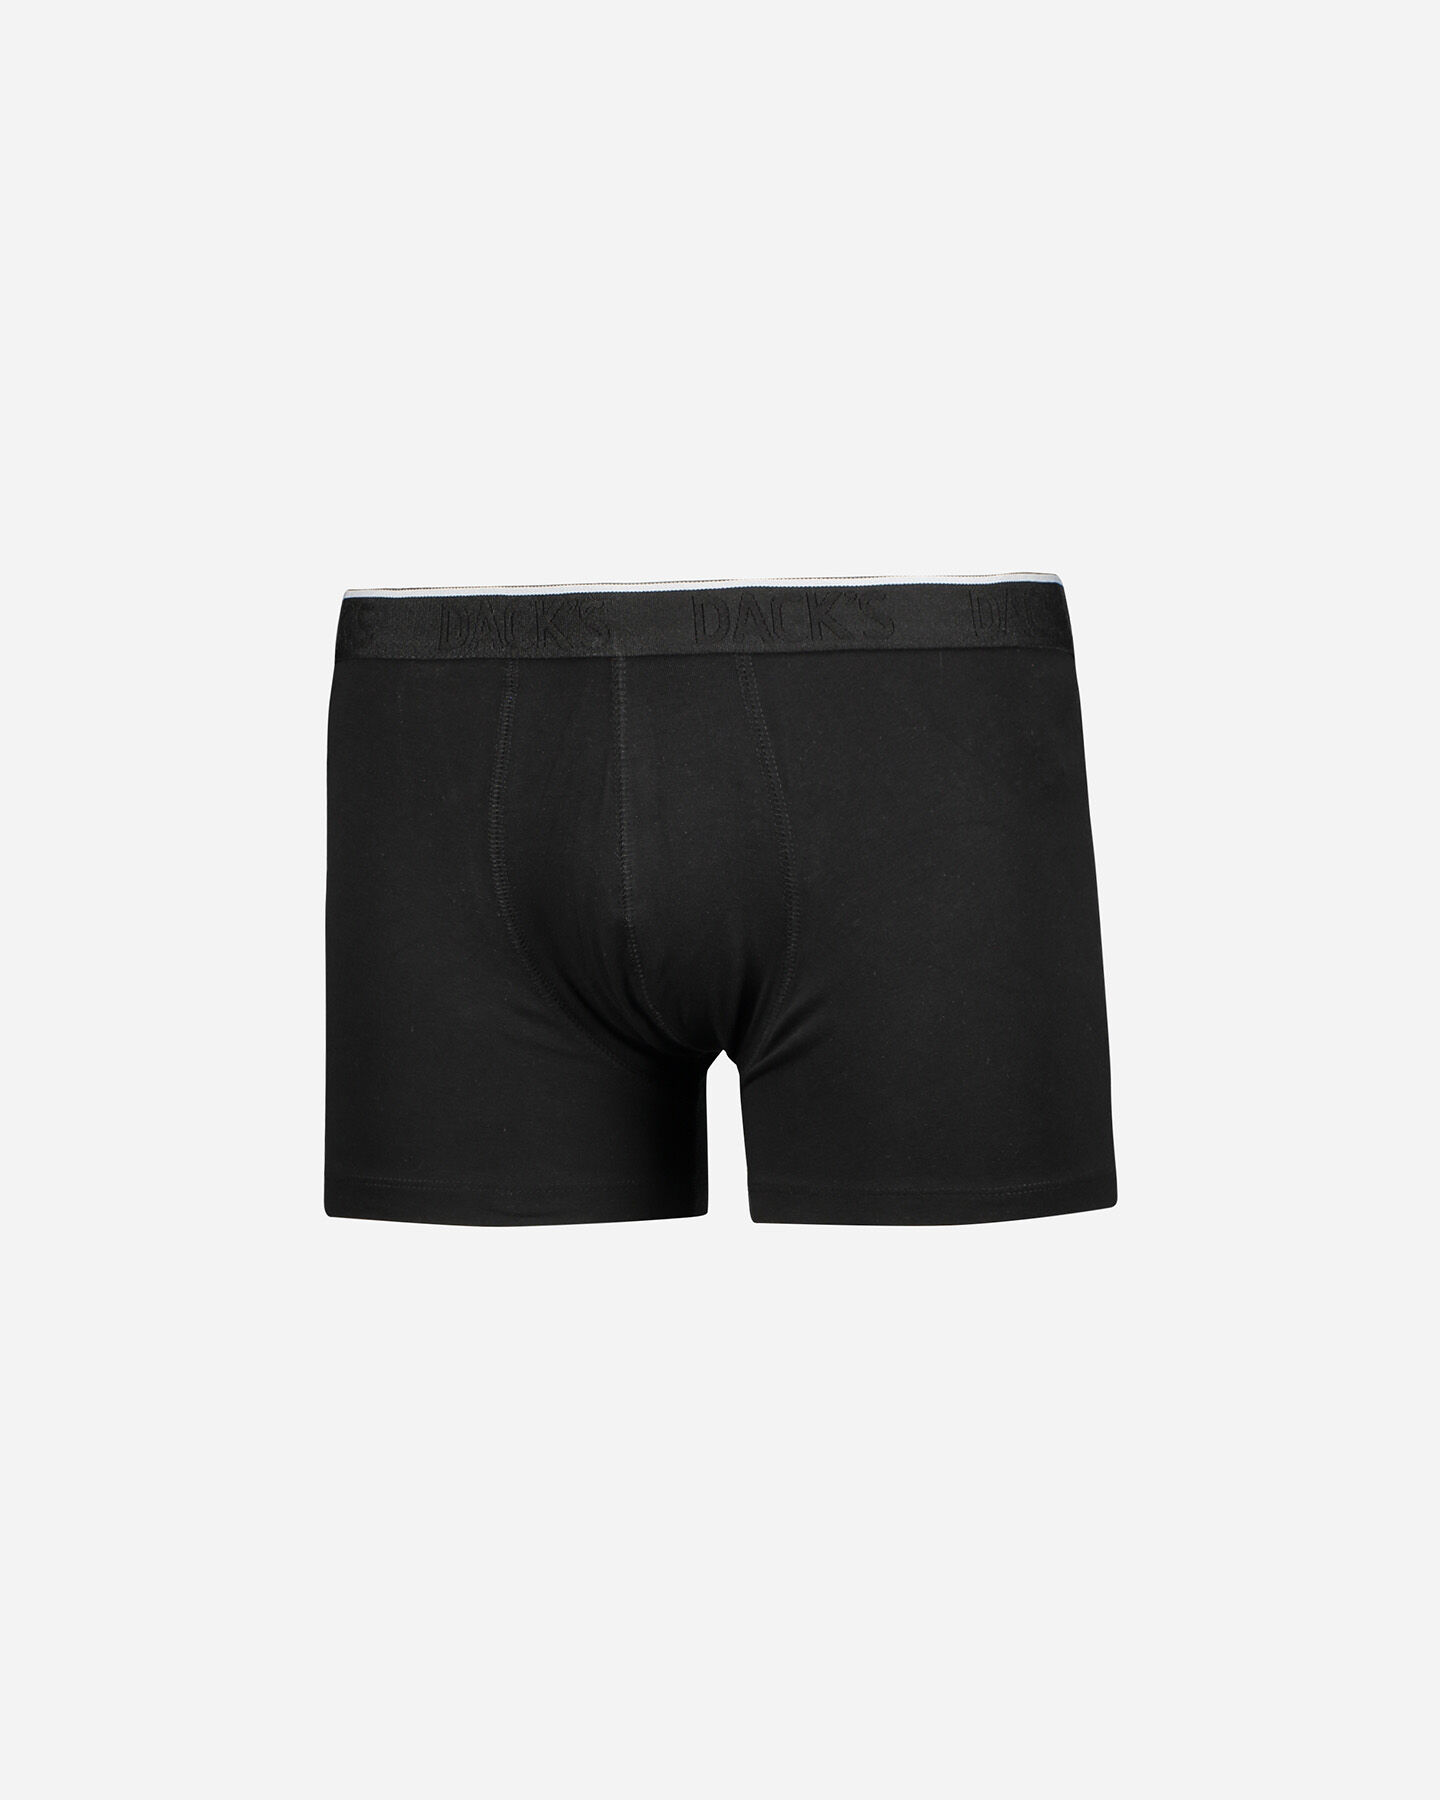  Intimo DACK'S BIPACK BASIC BOXER M S4061962|050/001|XL scatto 2